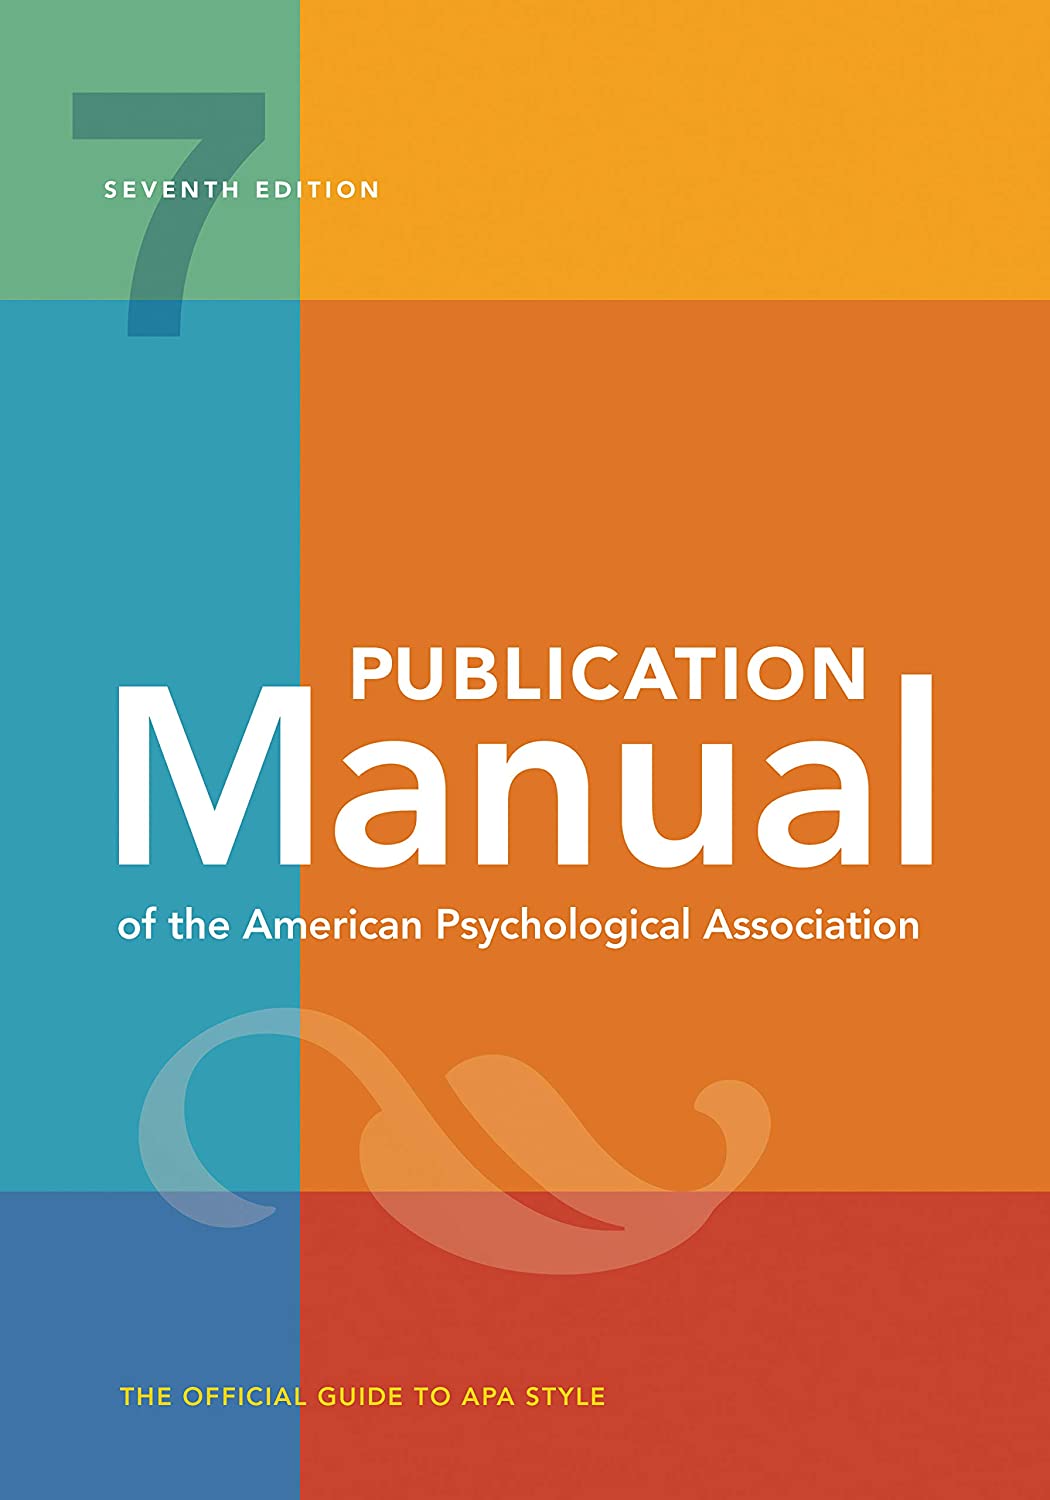 full test bank and practice test questions to accompany Publication Manual of the American Psychological Association